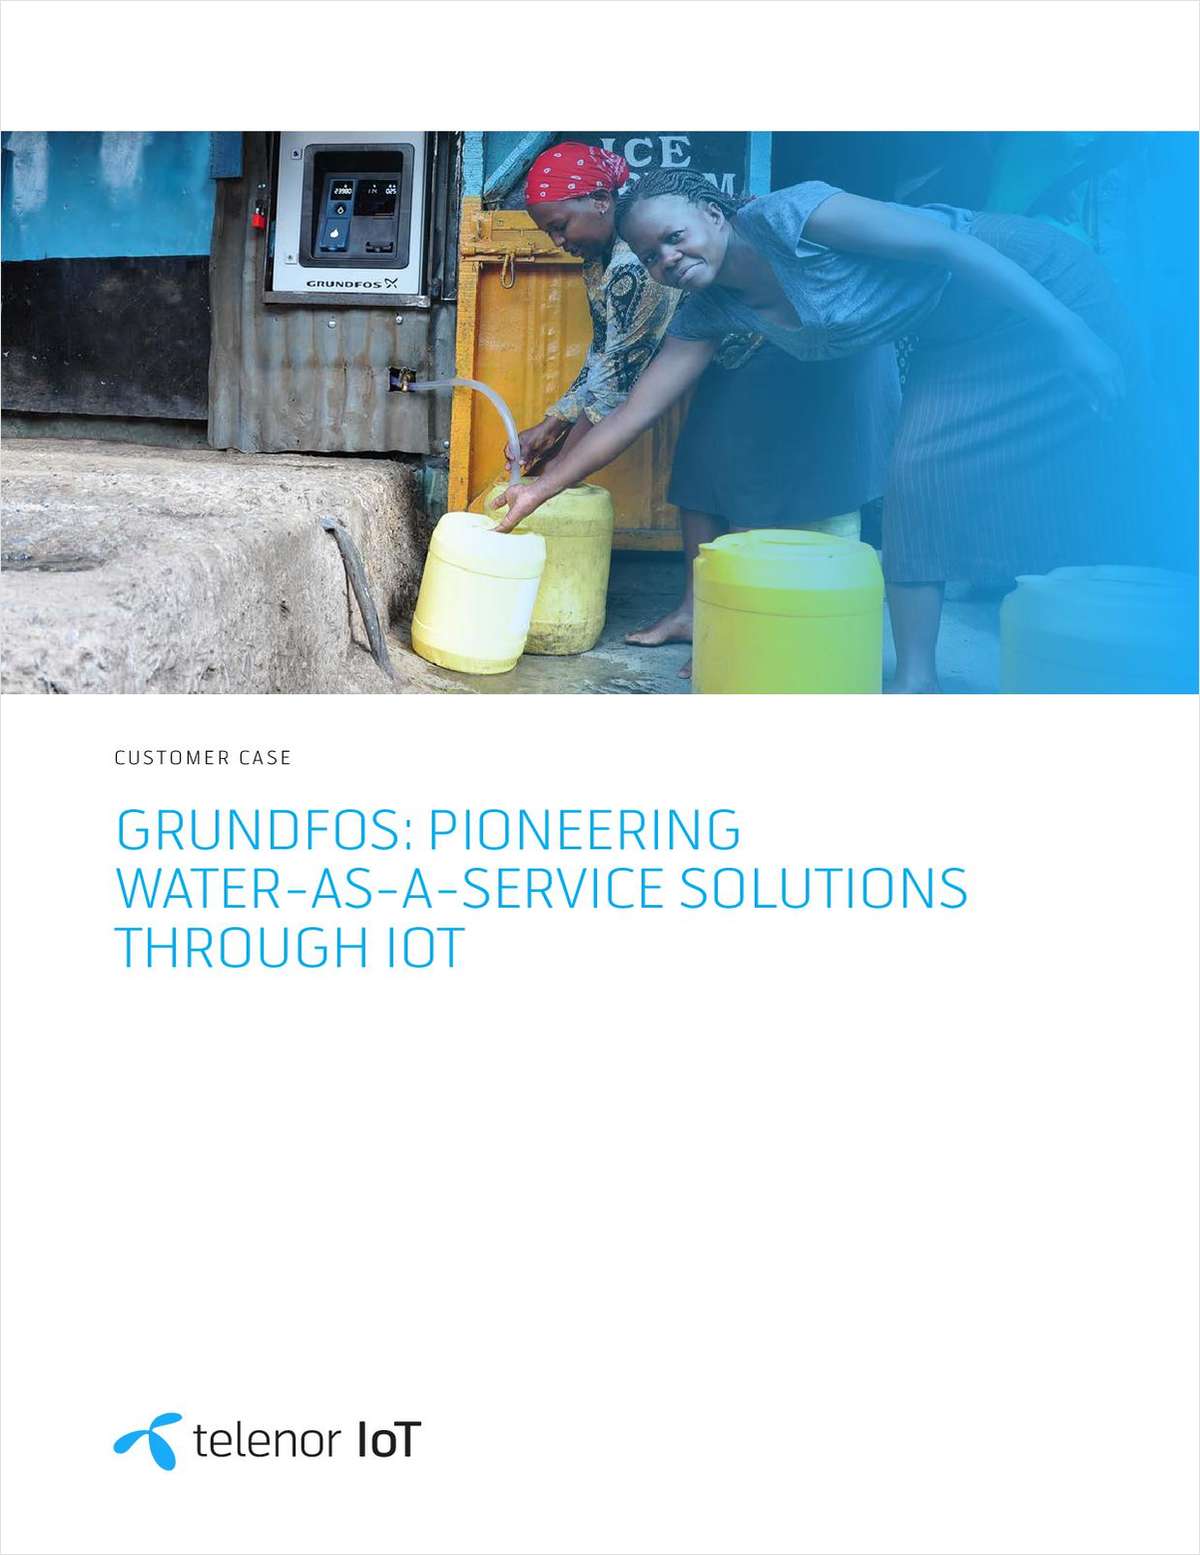 IoT customer case: Pioneering water-as-a-service solutions using IoT